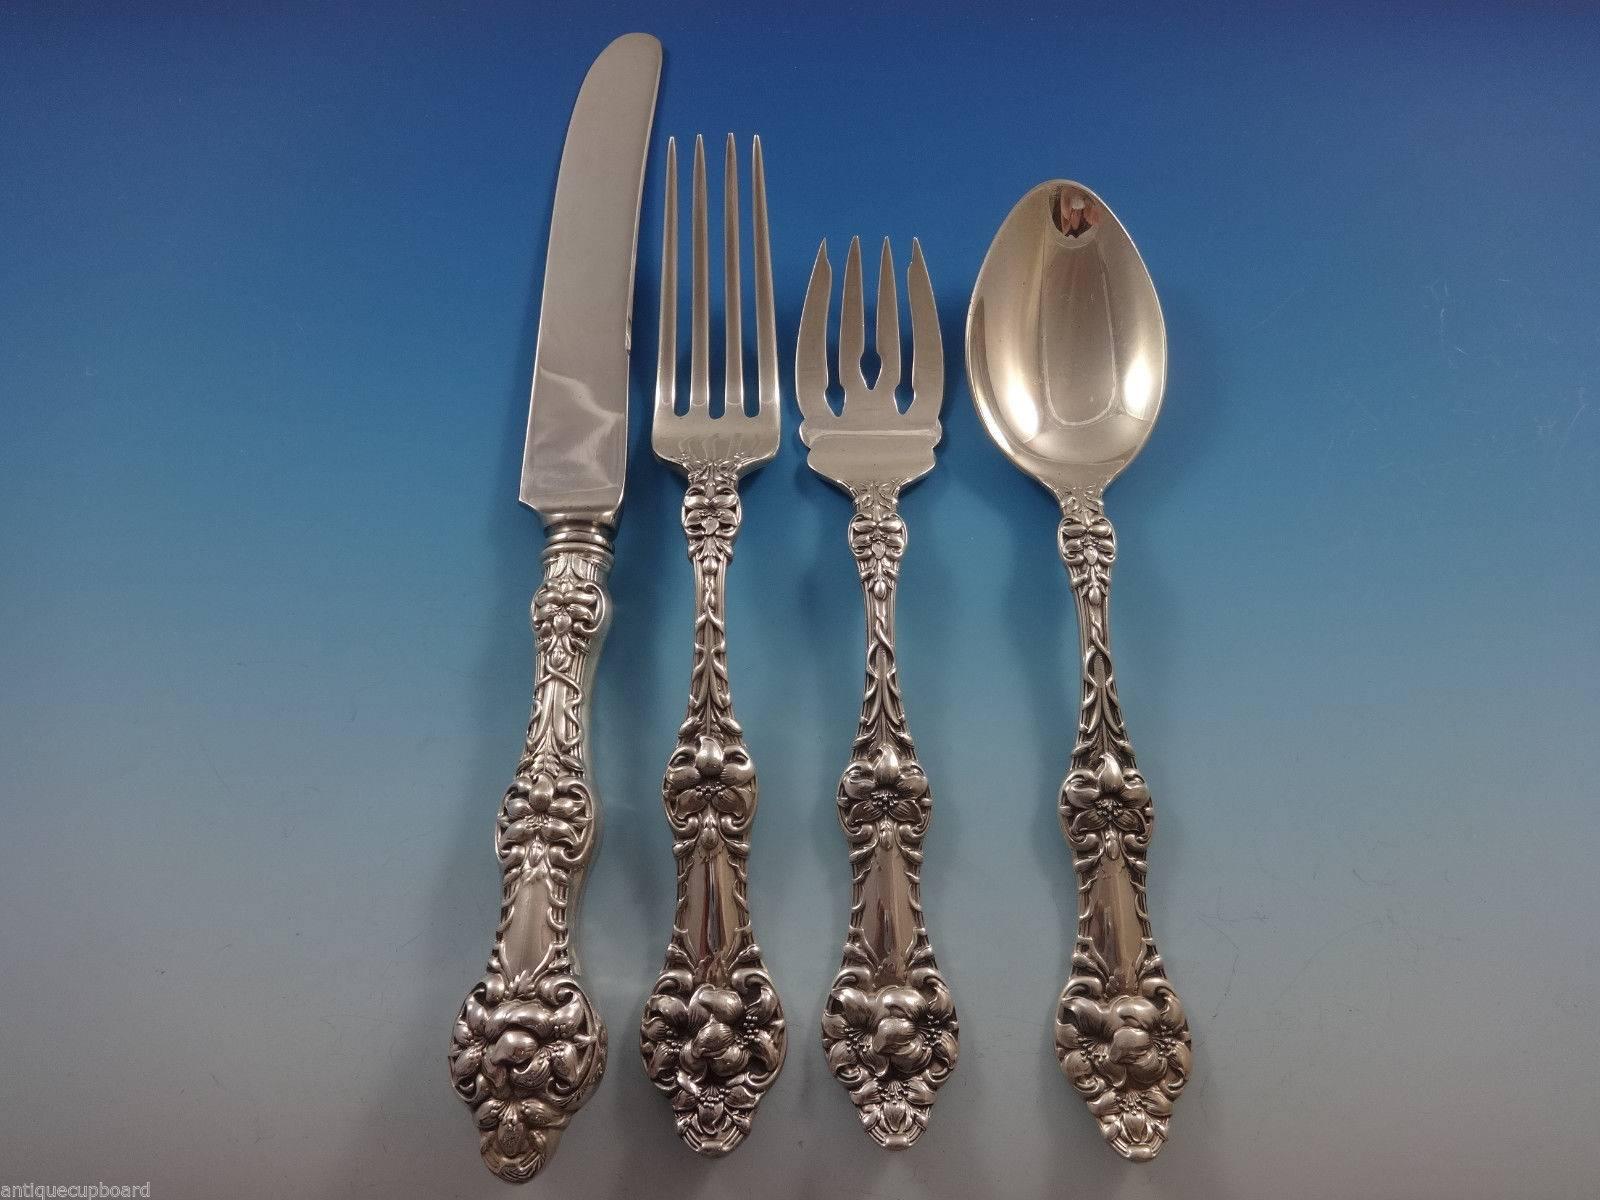 Exceptional old orange blossom by Gorham-Alvin sterling silver dinner size flatware set, 53 Pieces. This set includes:

12 dinner size knives, 9 3/4